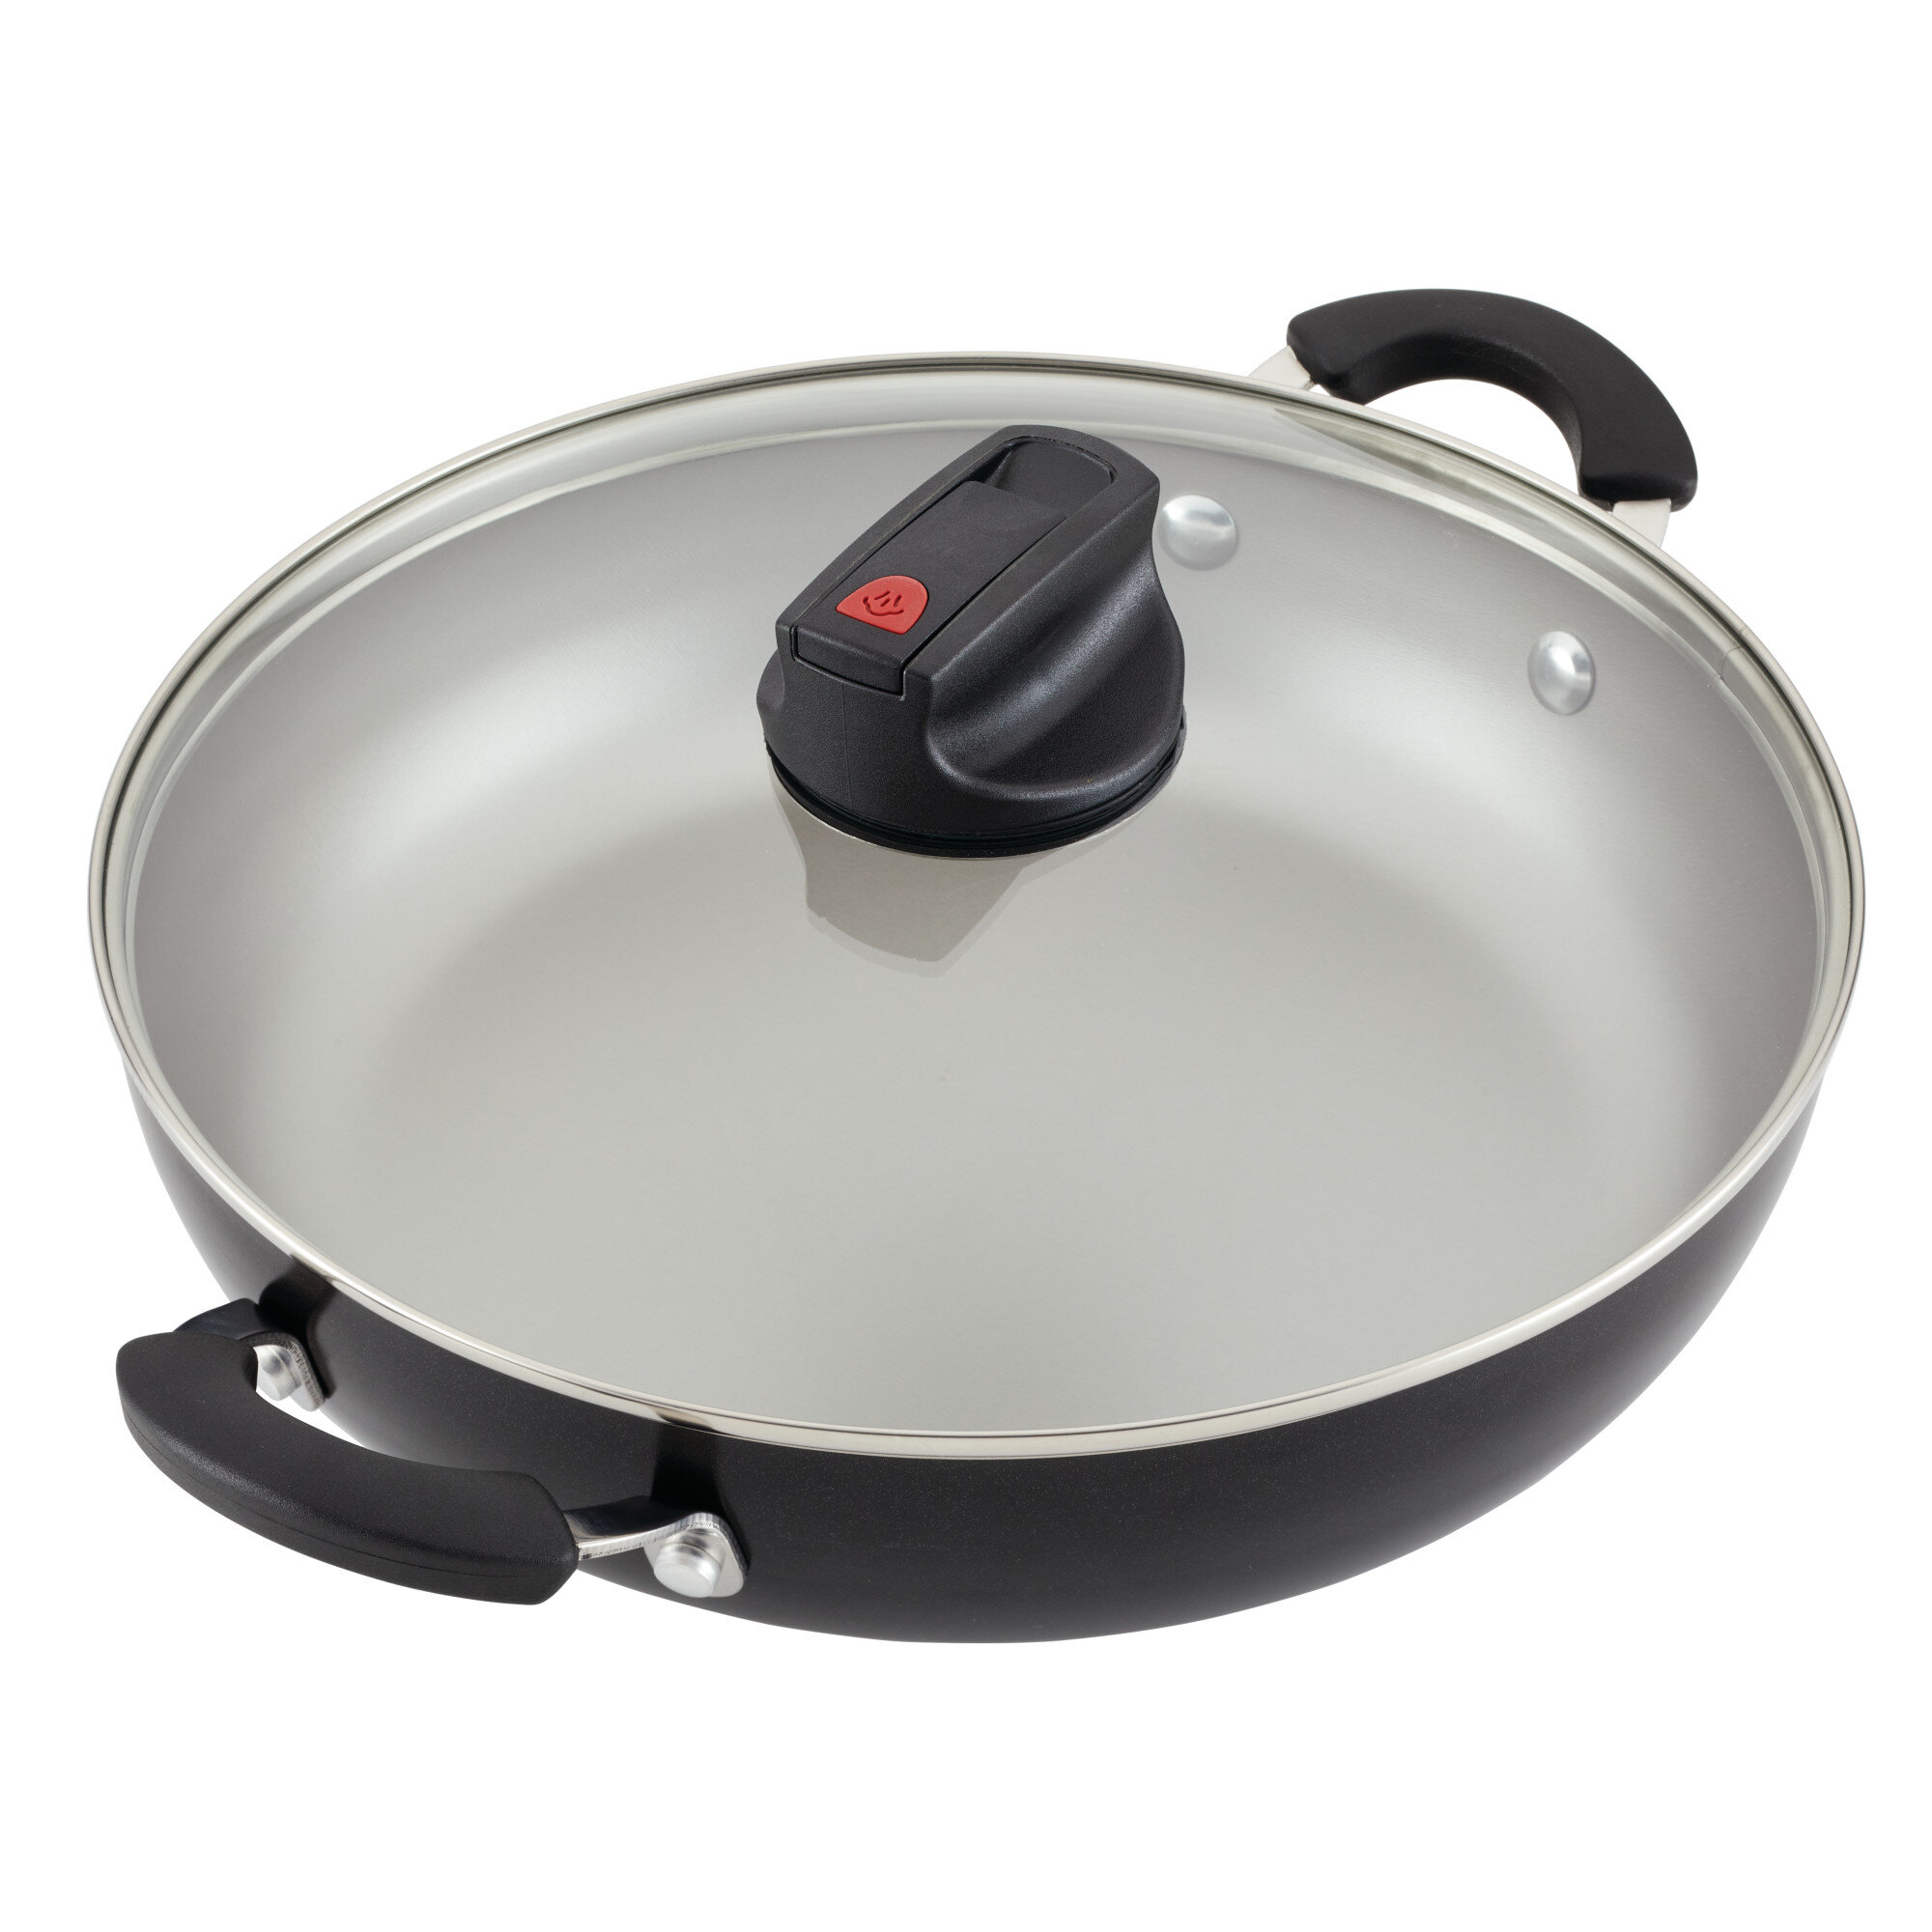 Farberware Smart Control Aluminum Nonstick Everything Chef's Pan with Lid,  11.25 Inch